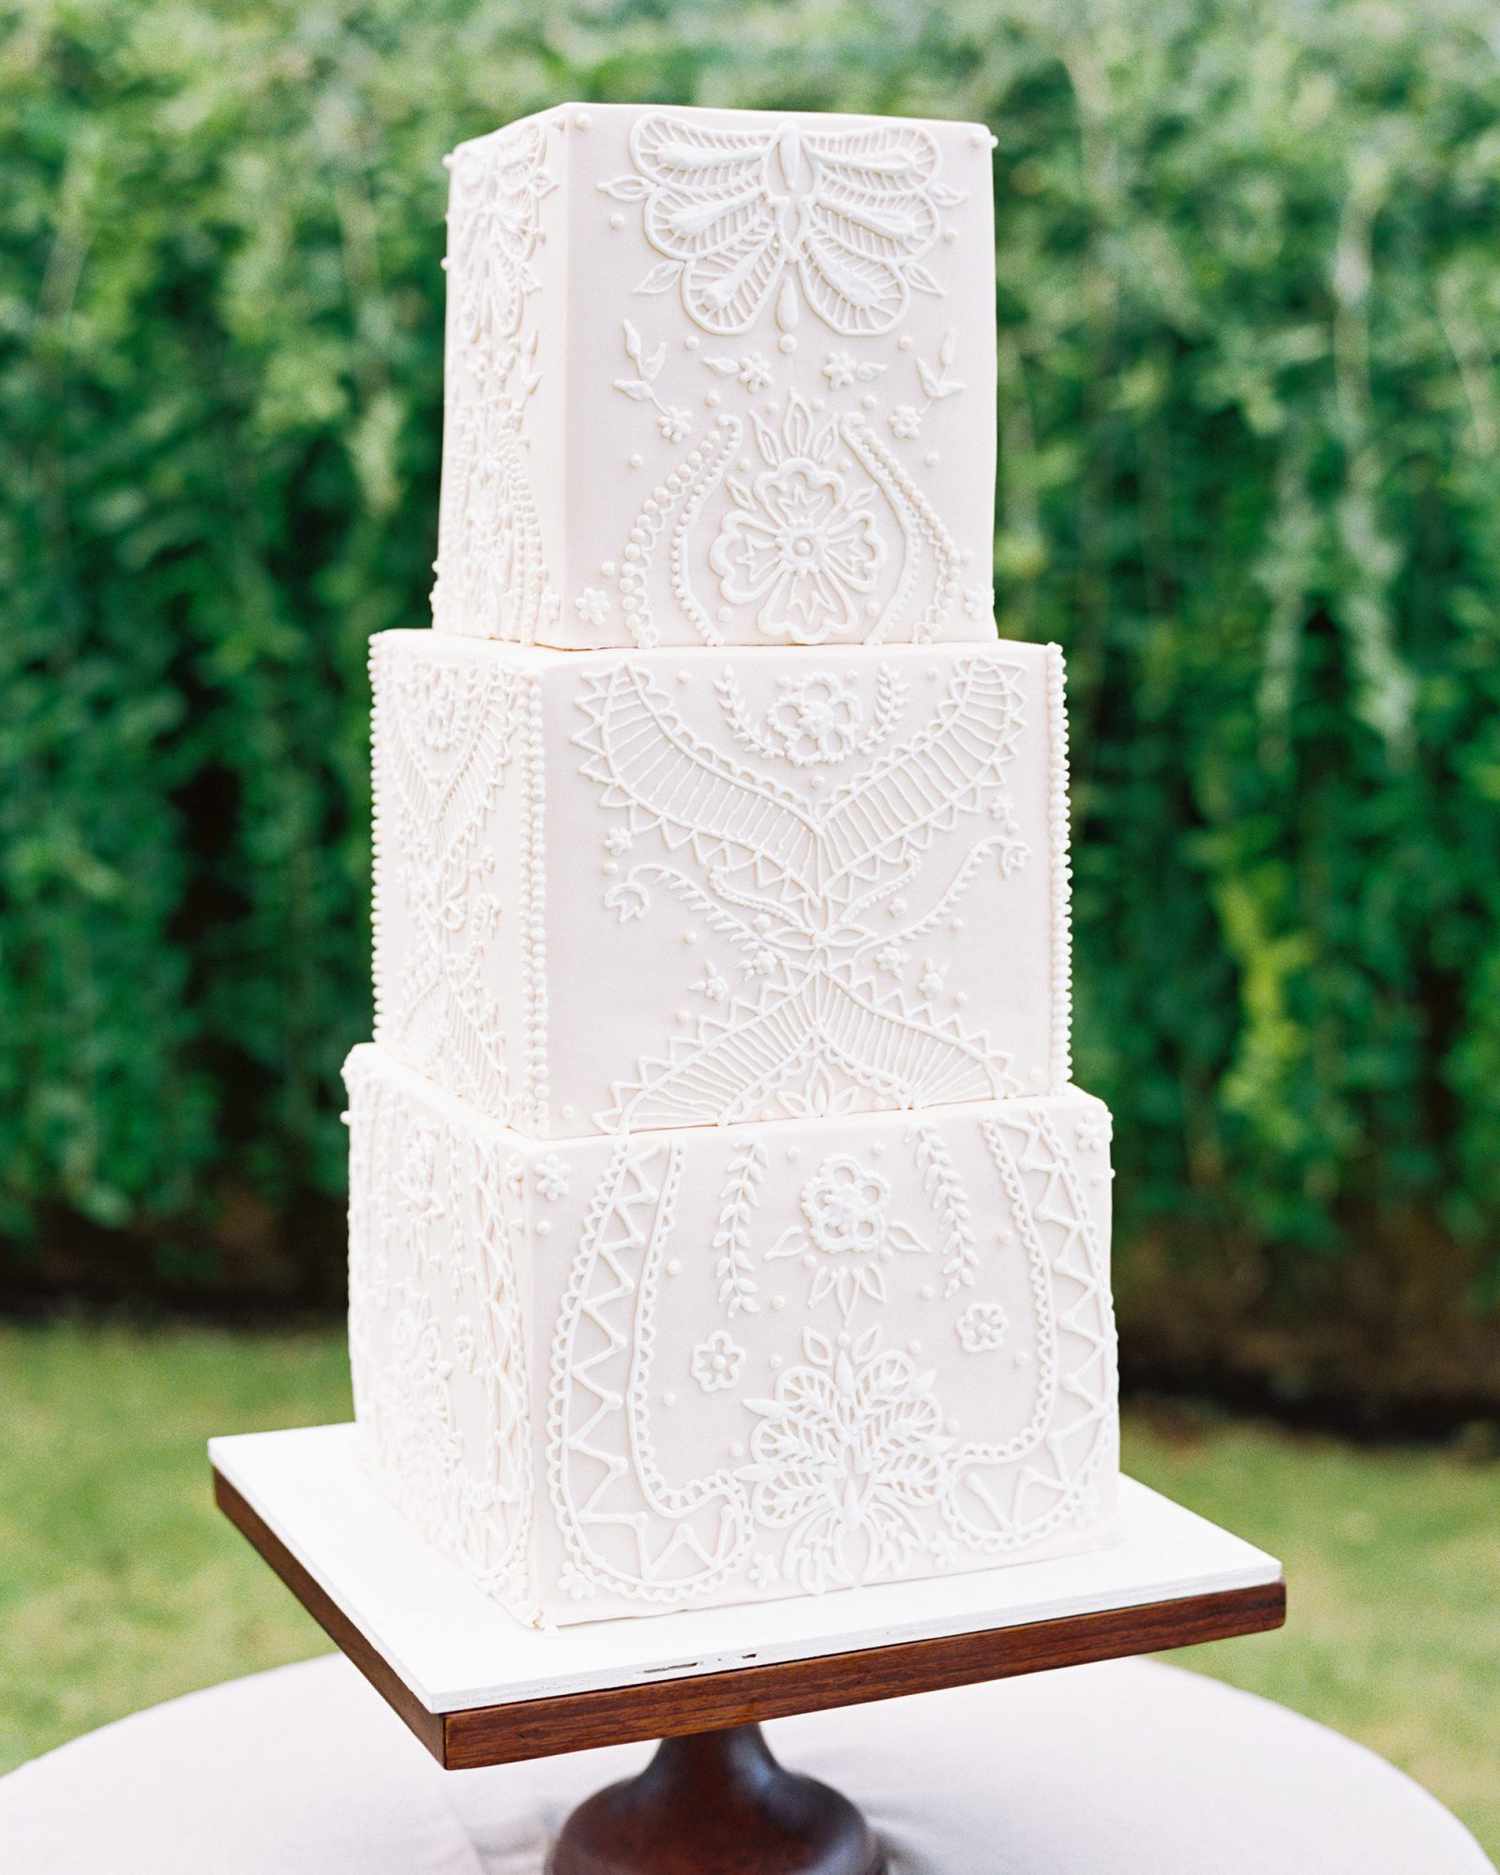 cubed wedding textured lace white cake